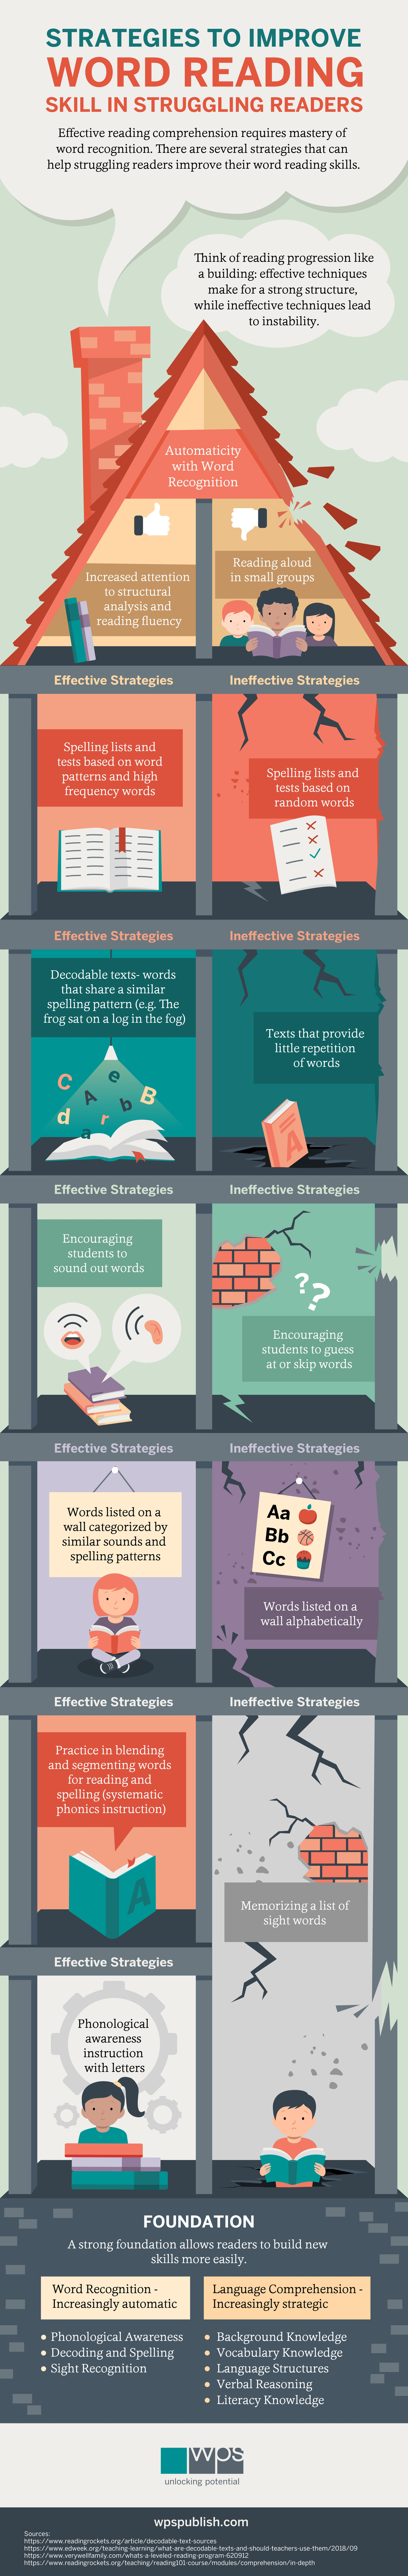 Strategies to Improve Reading Comprehension